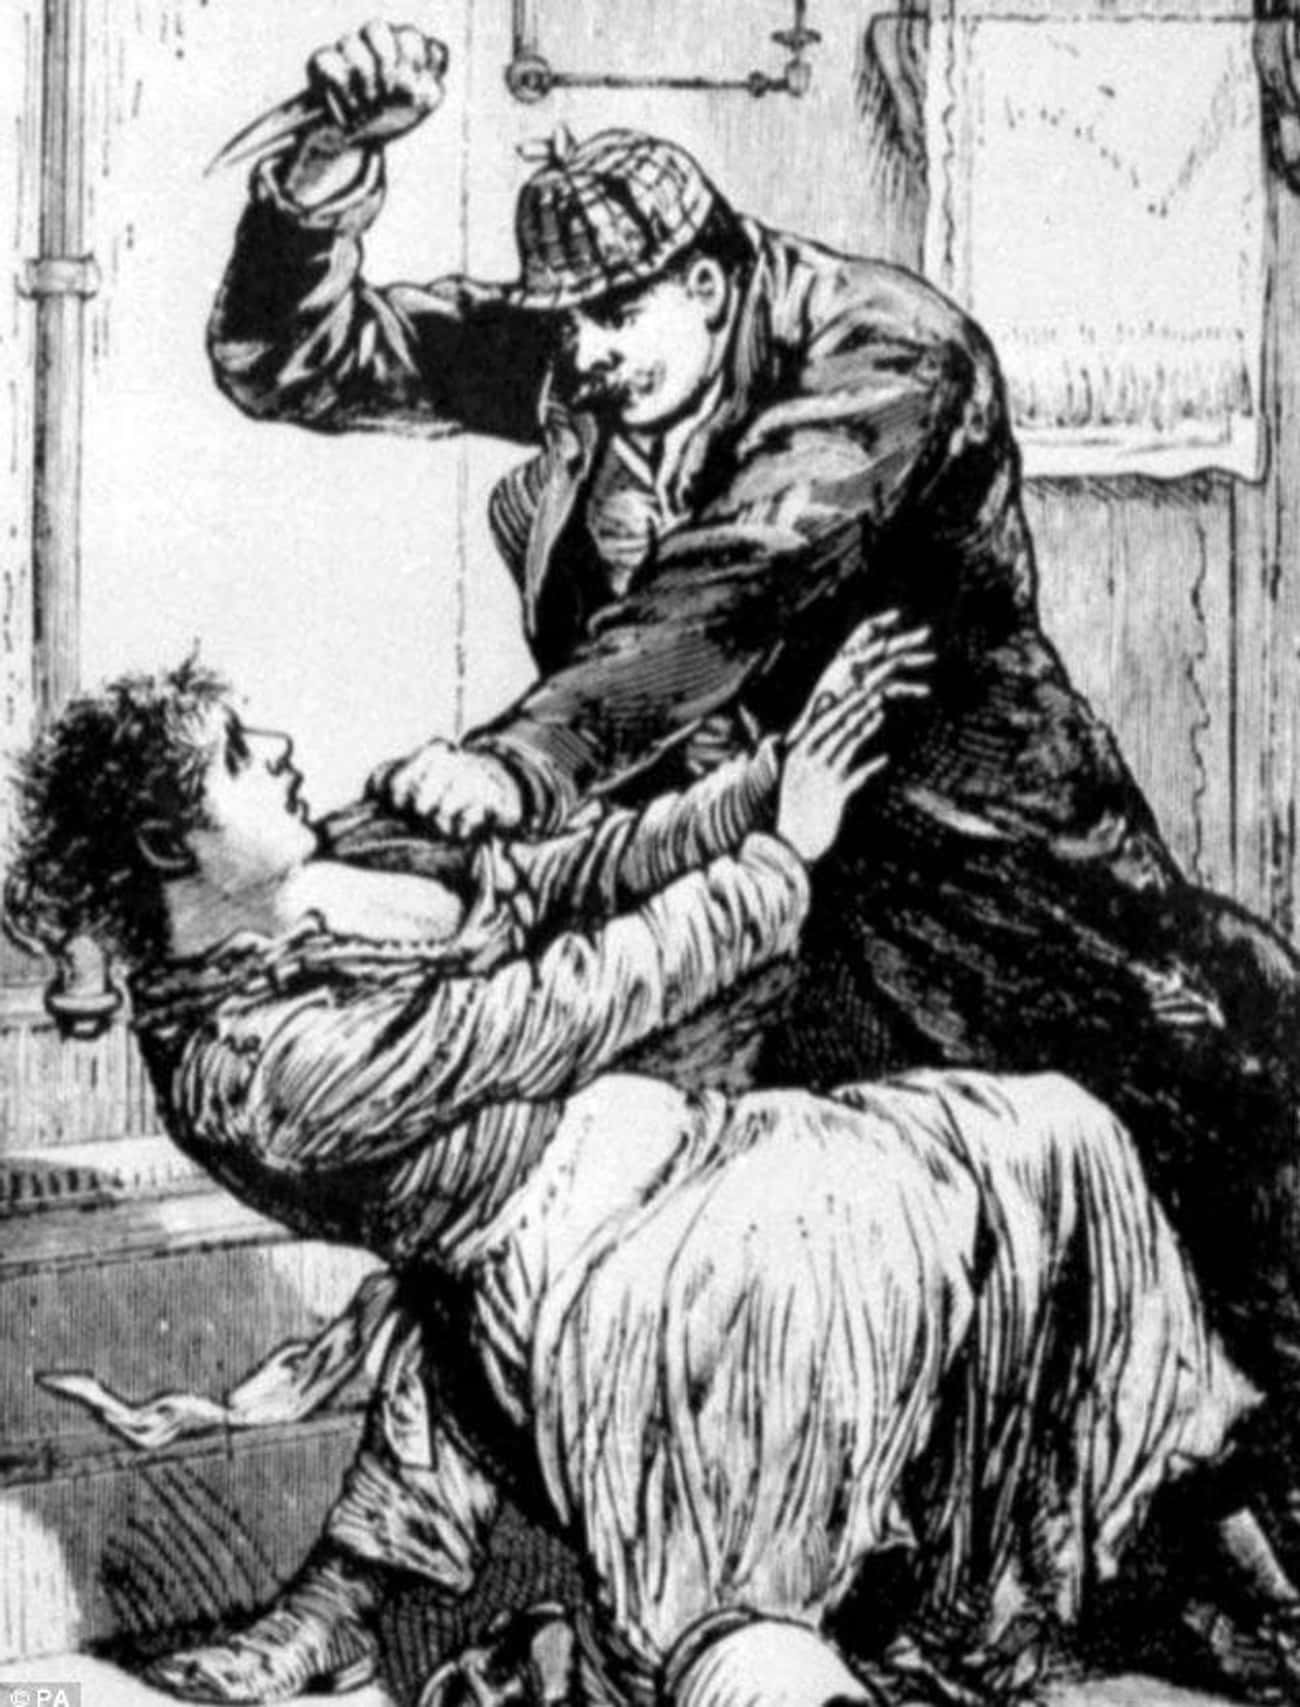 Jack The Ripper May Have Been Several Killers